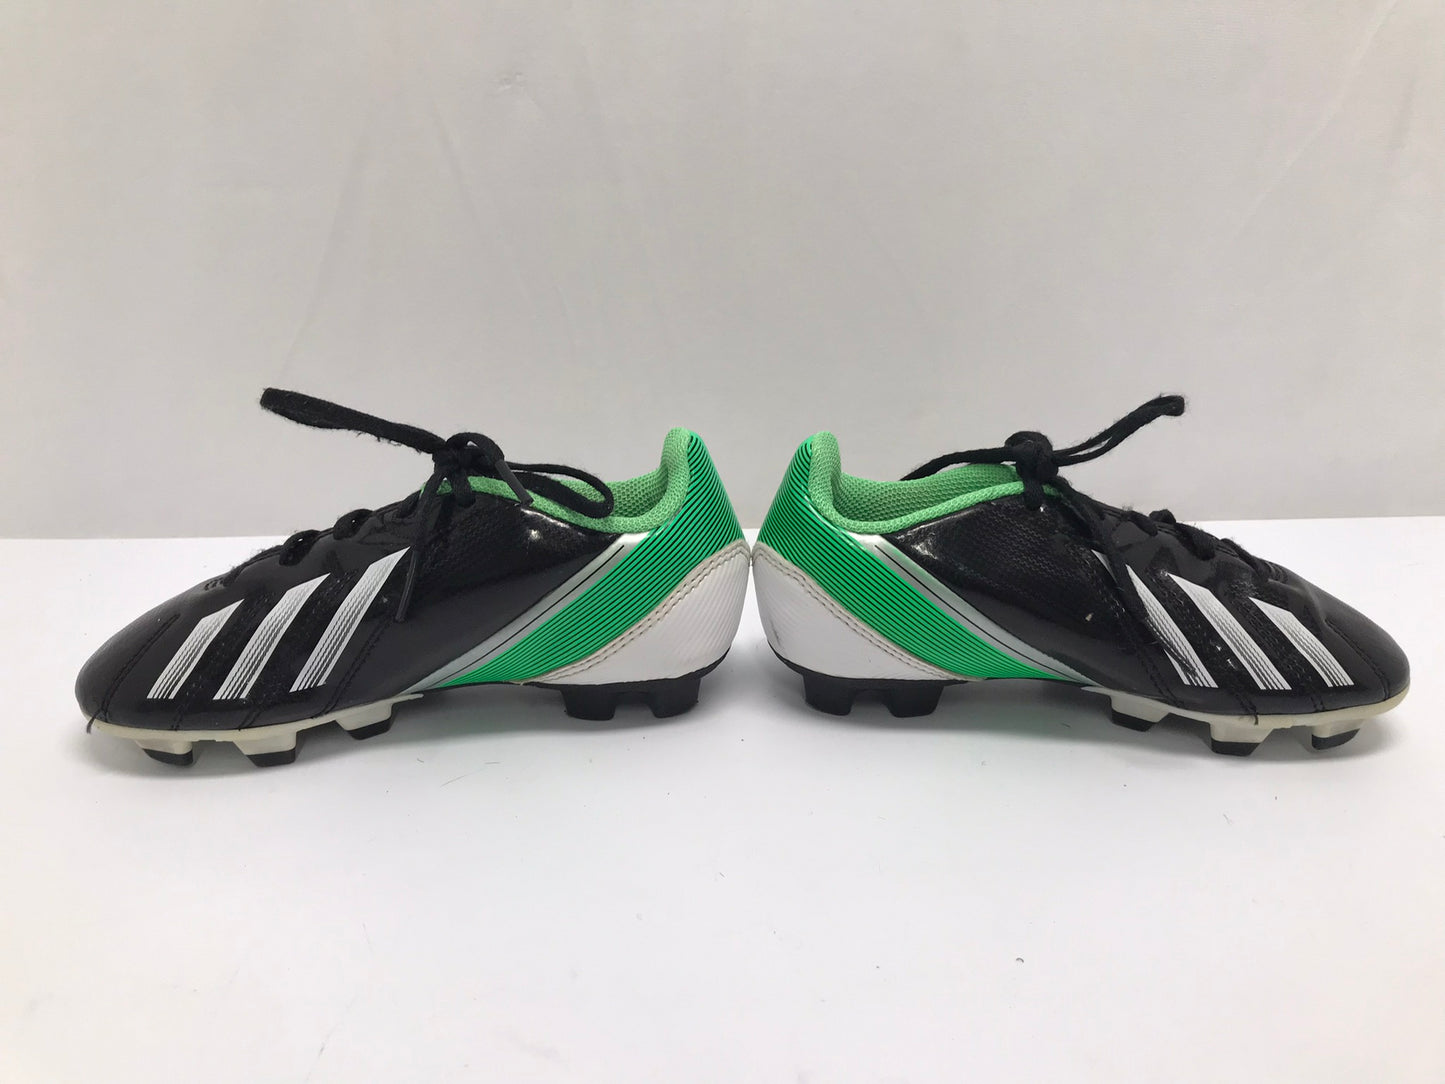 Soccer Shoes Cleats Child Size 12 Adidas Black Green Excellent